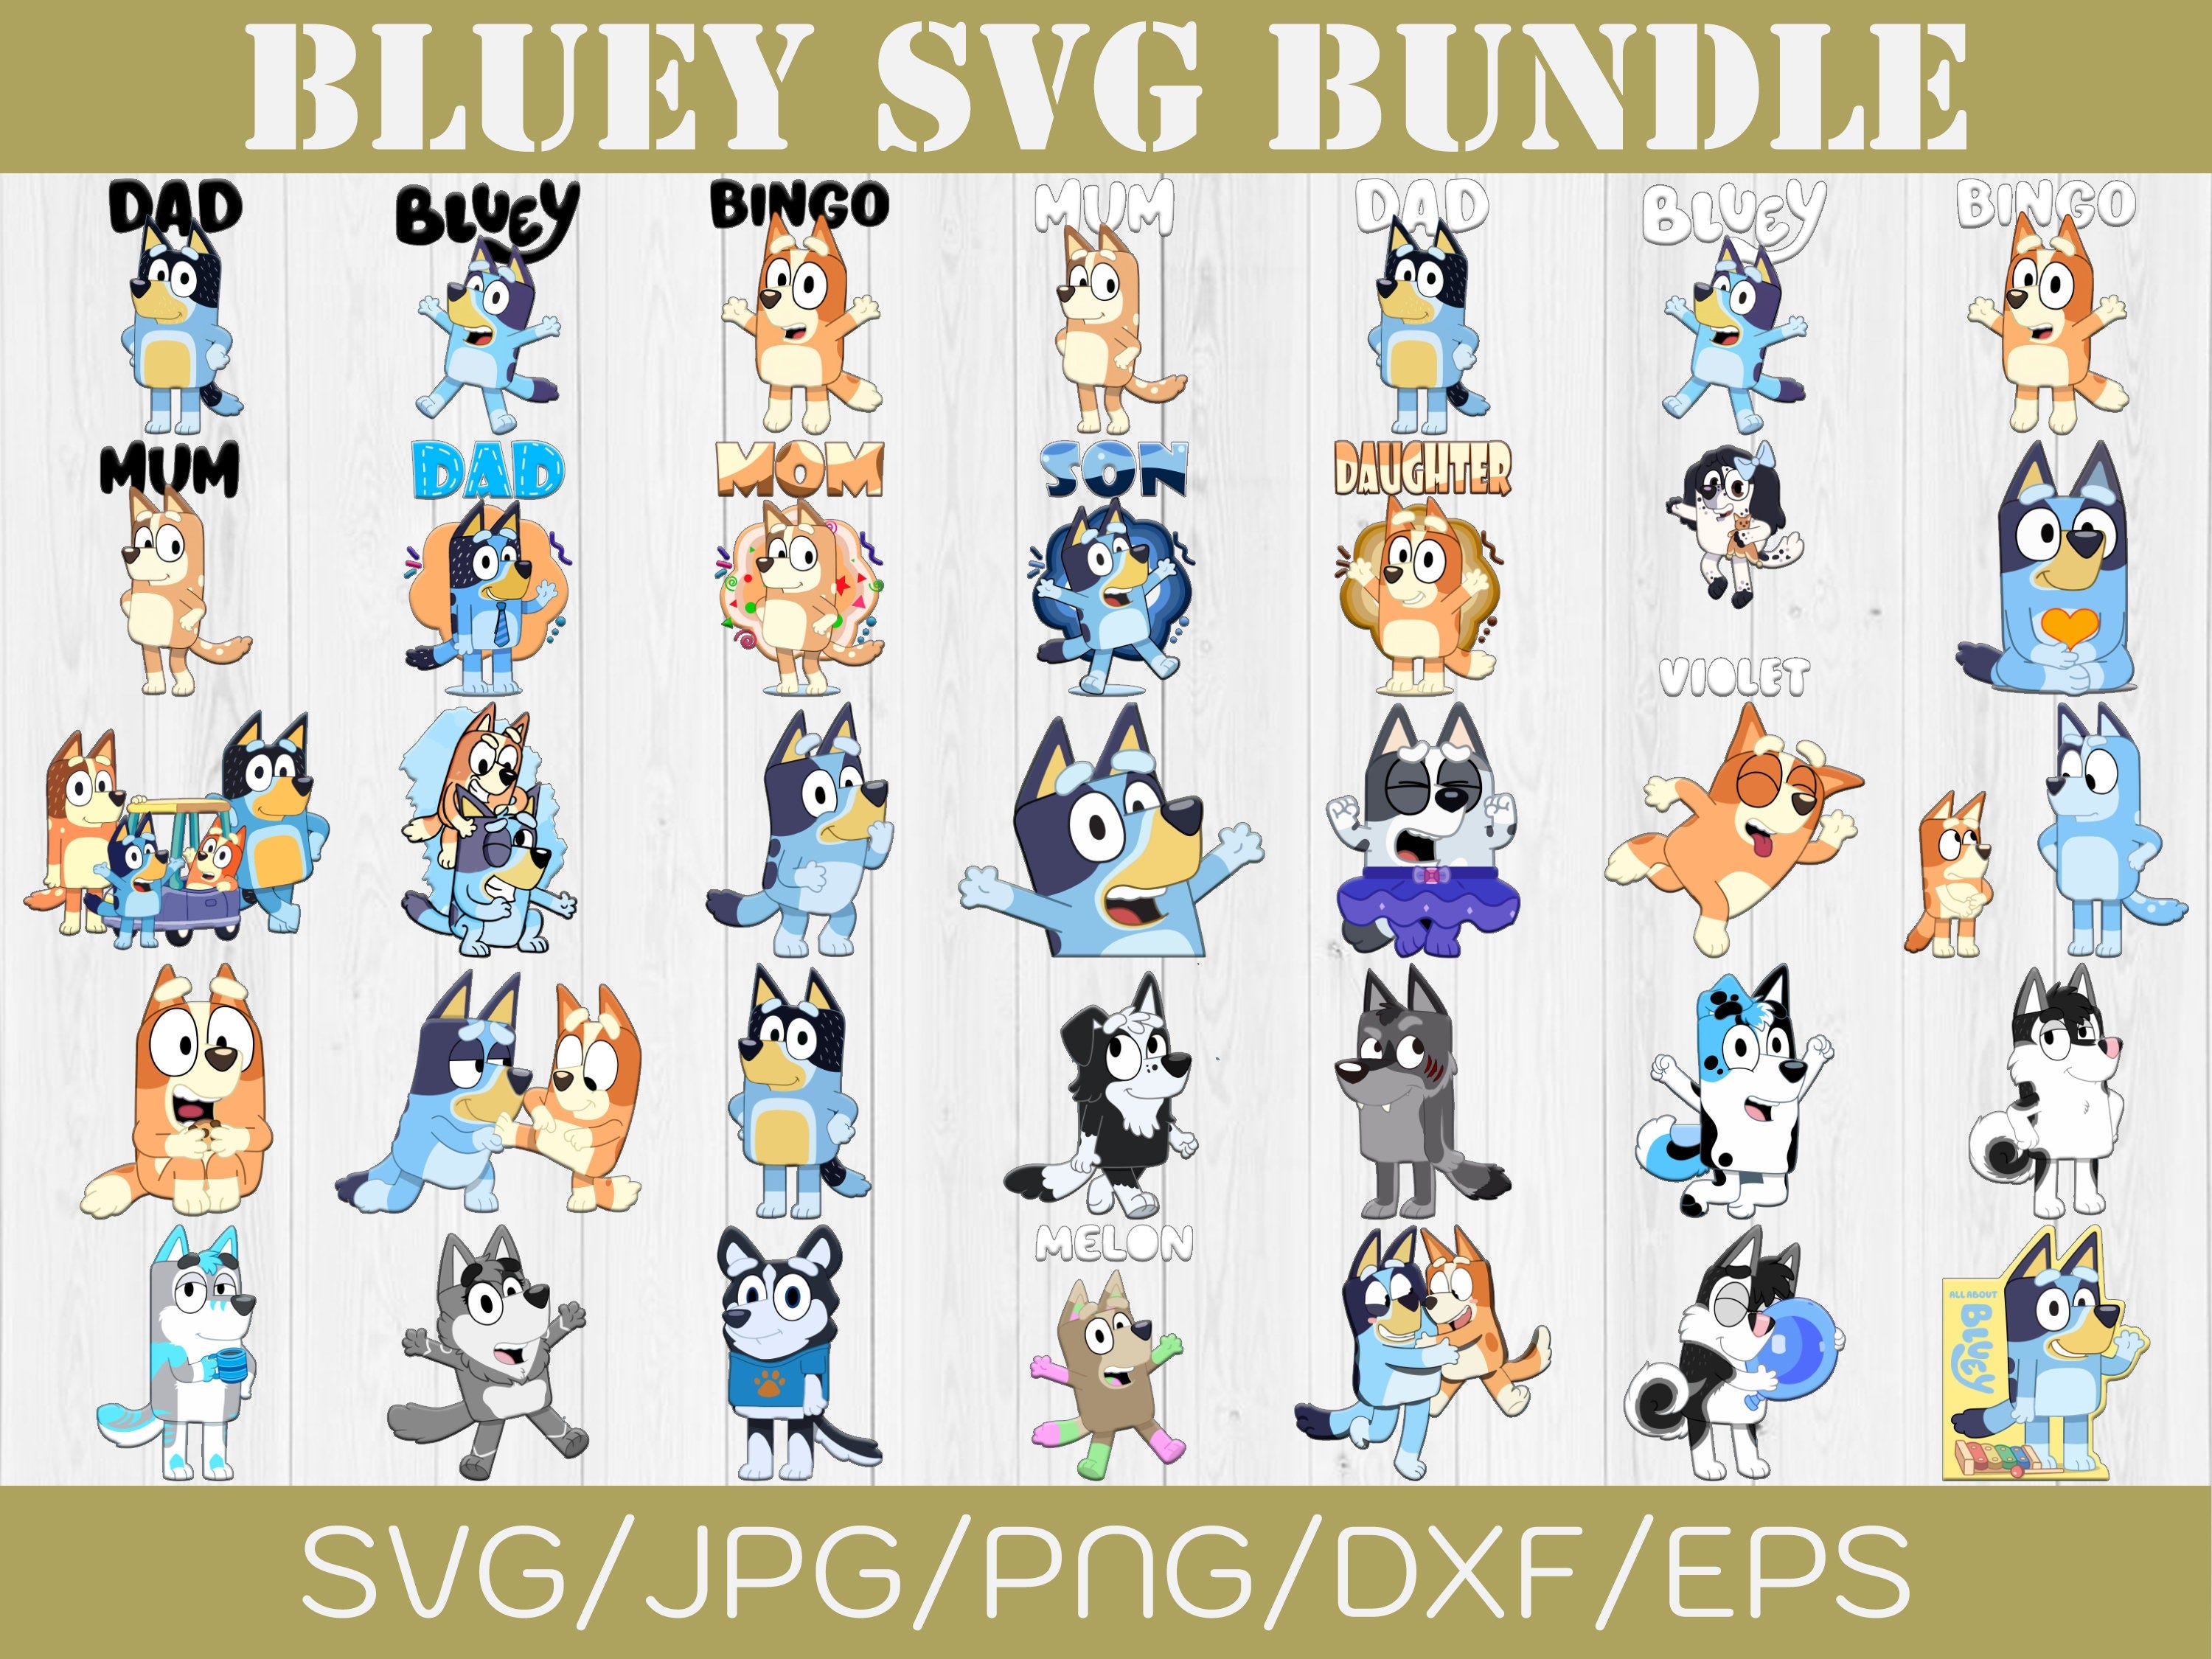 Bluey Png/Svg Bundle, Bluey Happy Birthday Png, Bluey Characters, Bluey Silhouette, Bluey Digital Download